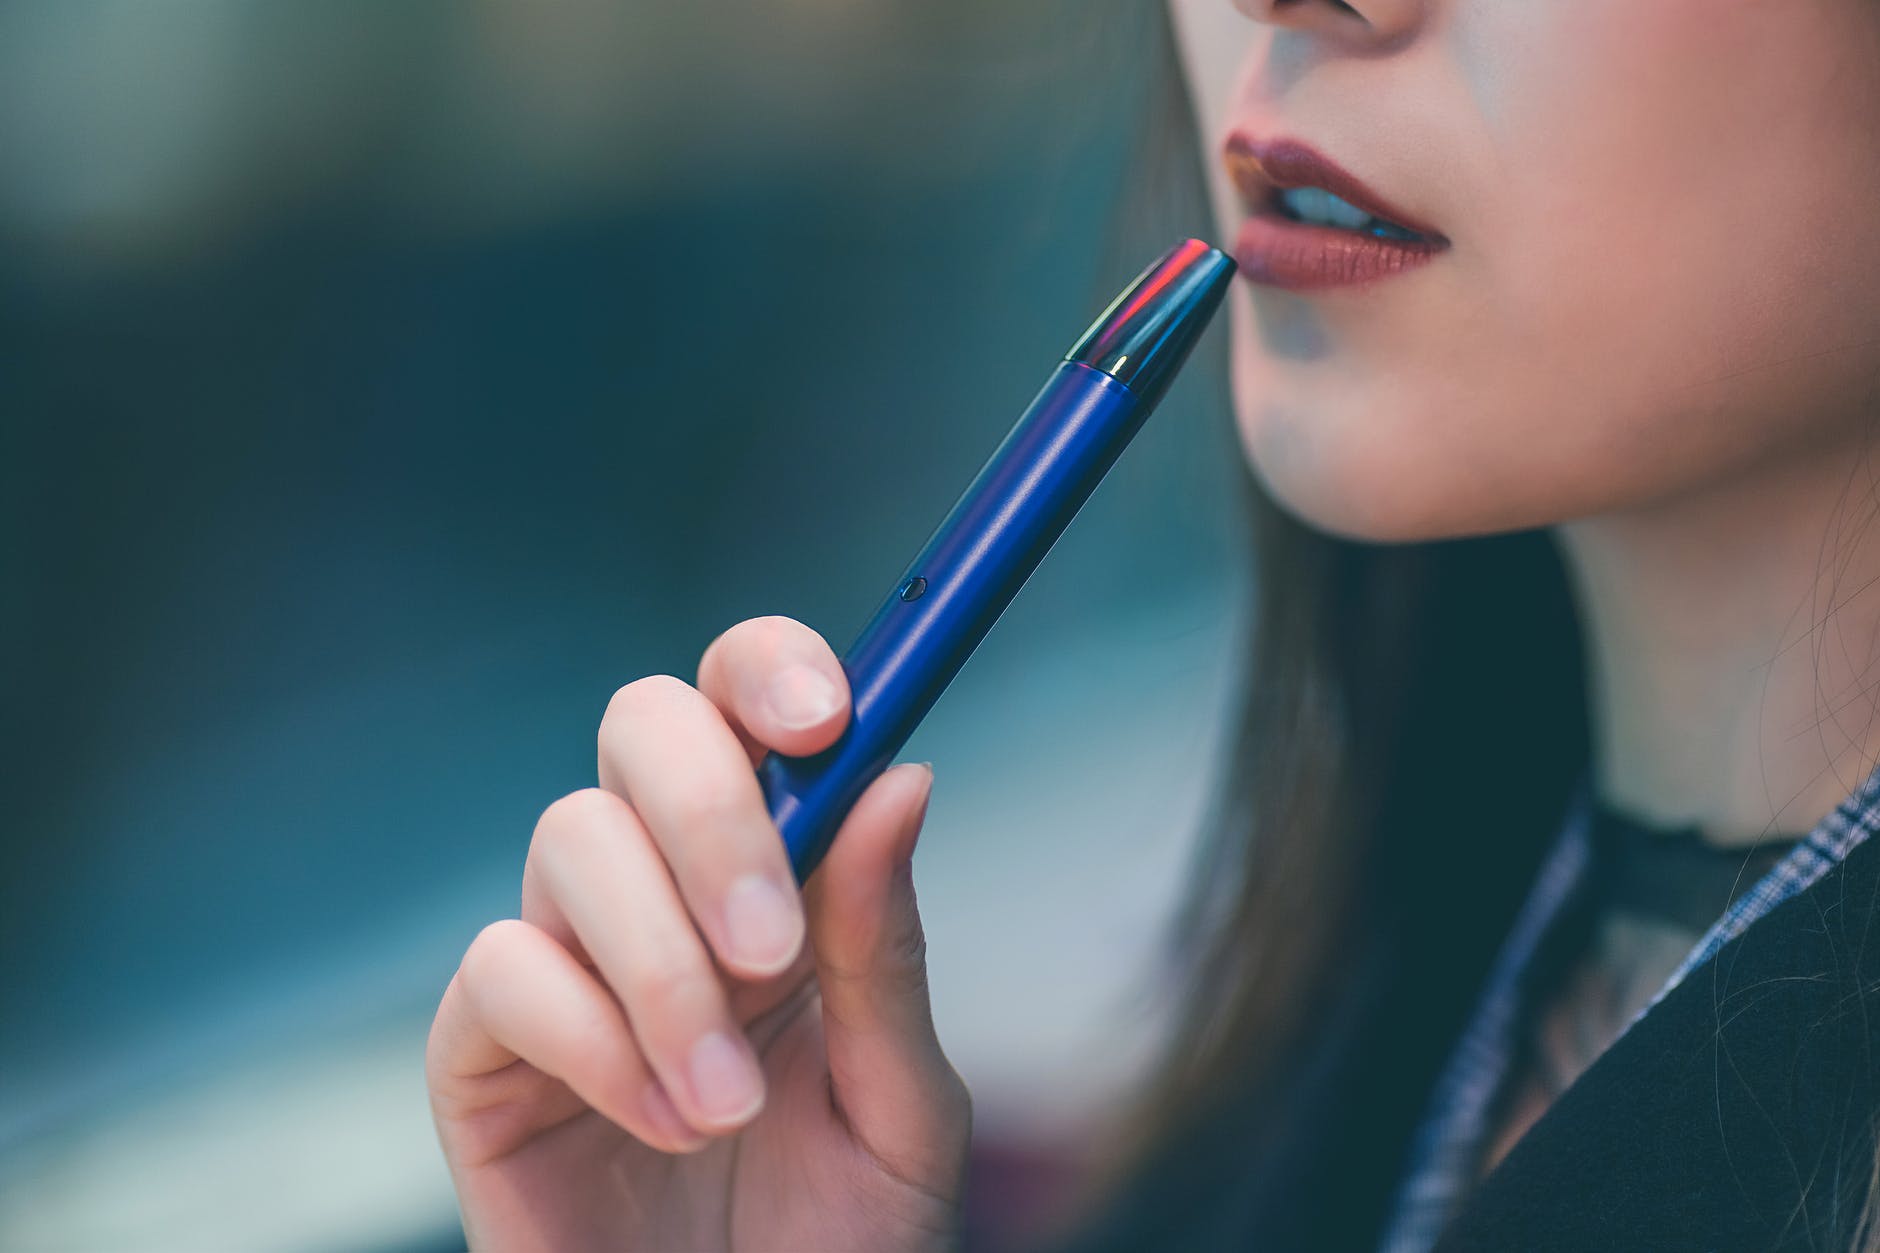 Vaping triples the chance of user taking up smoking, report finds